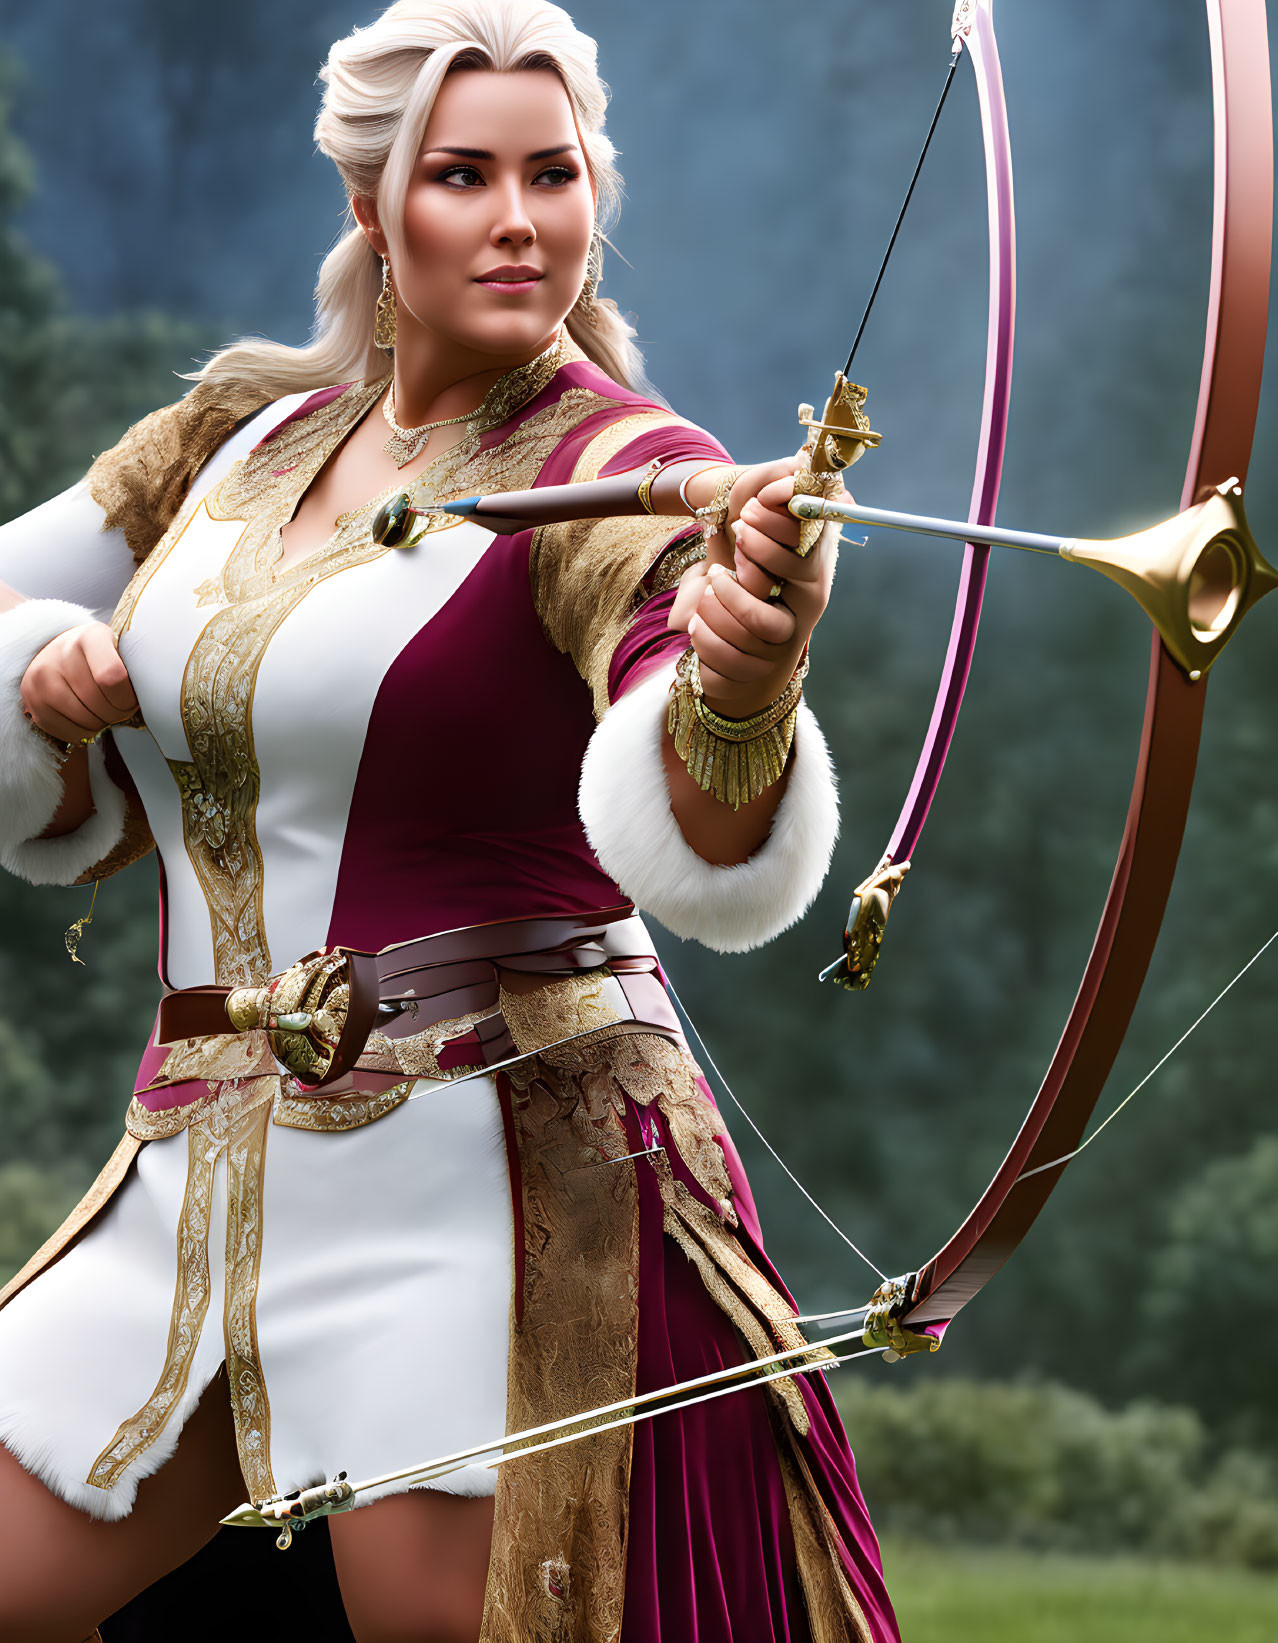 Fantasy archer in golden-trimmed outfit aims arrow in misty forest